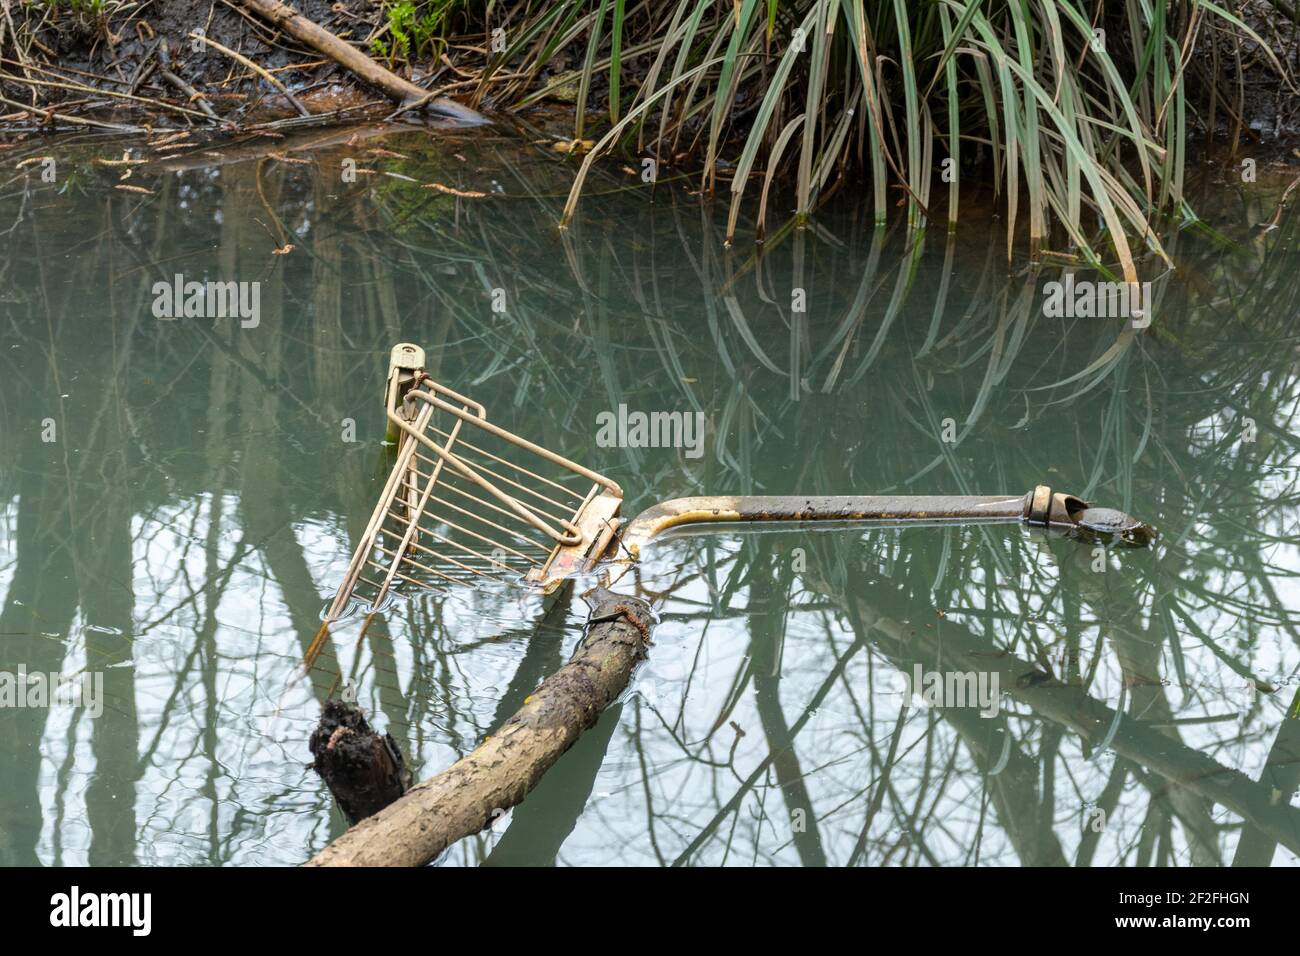 Shopping trolley or cart dumped in a river, UK Stock Photo